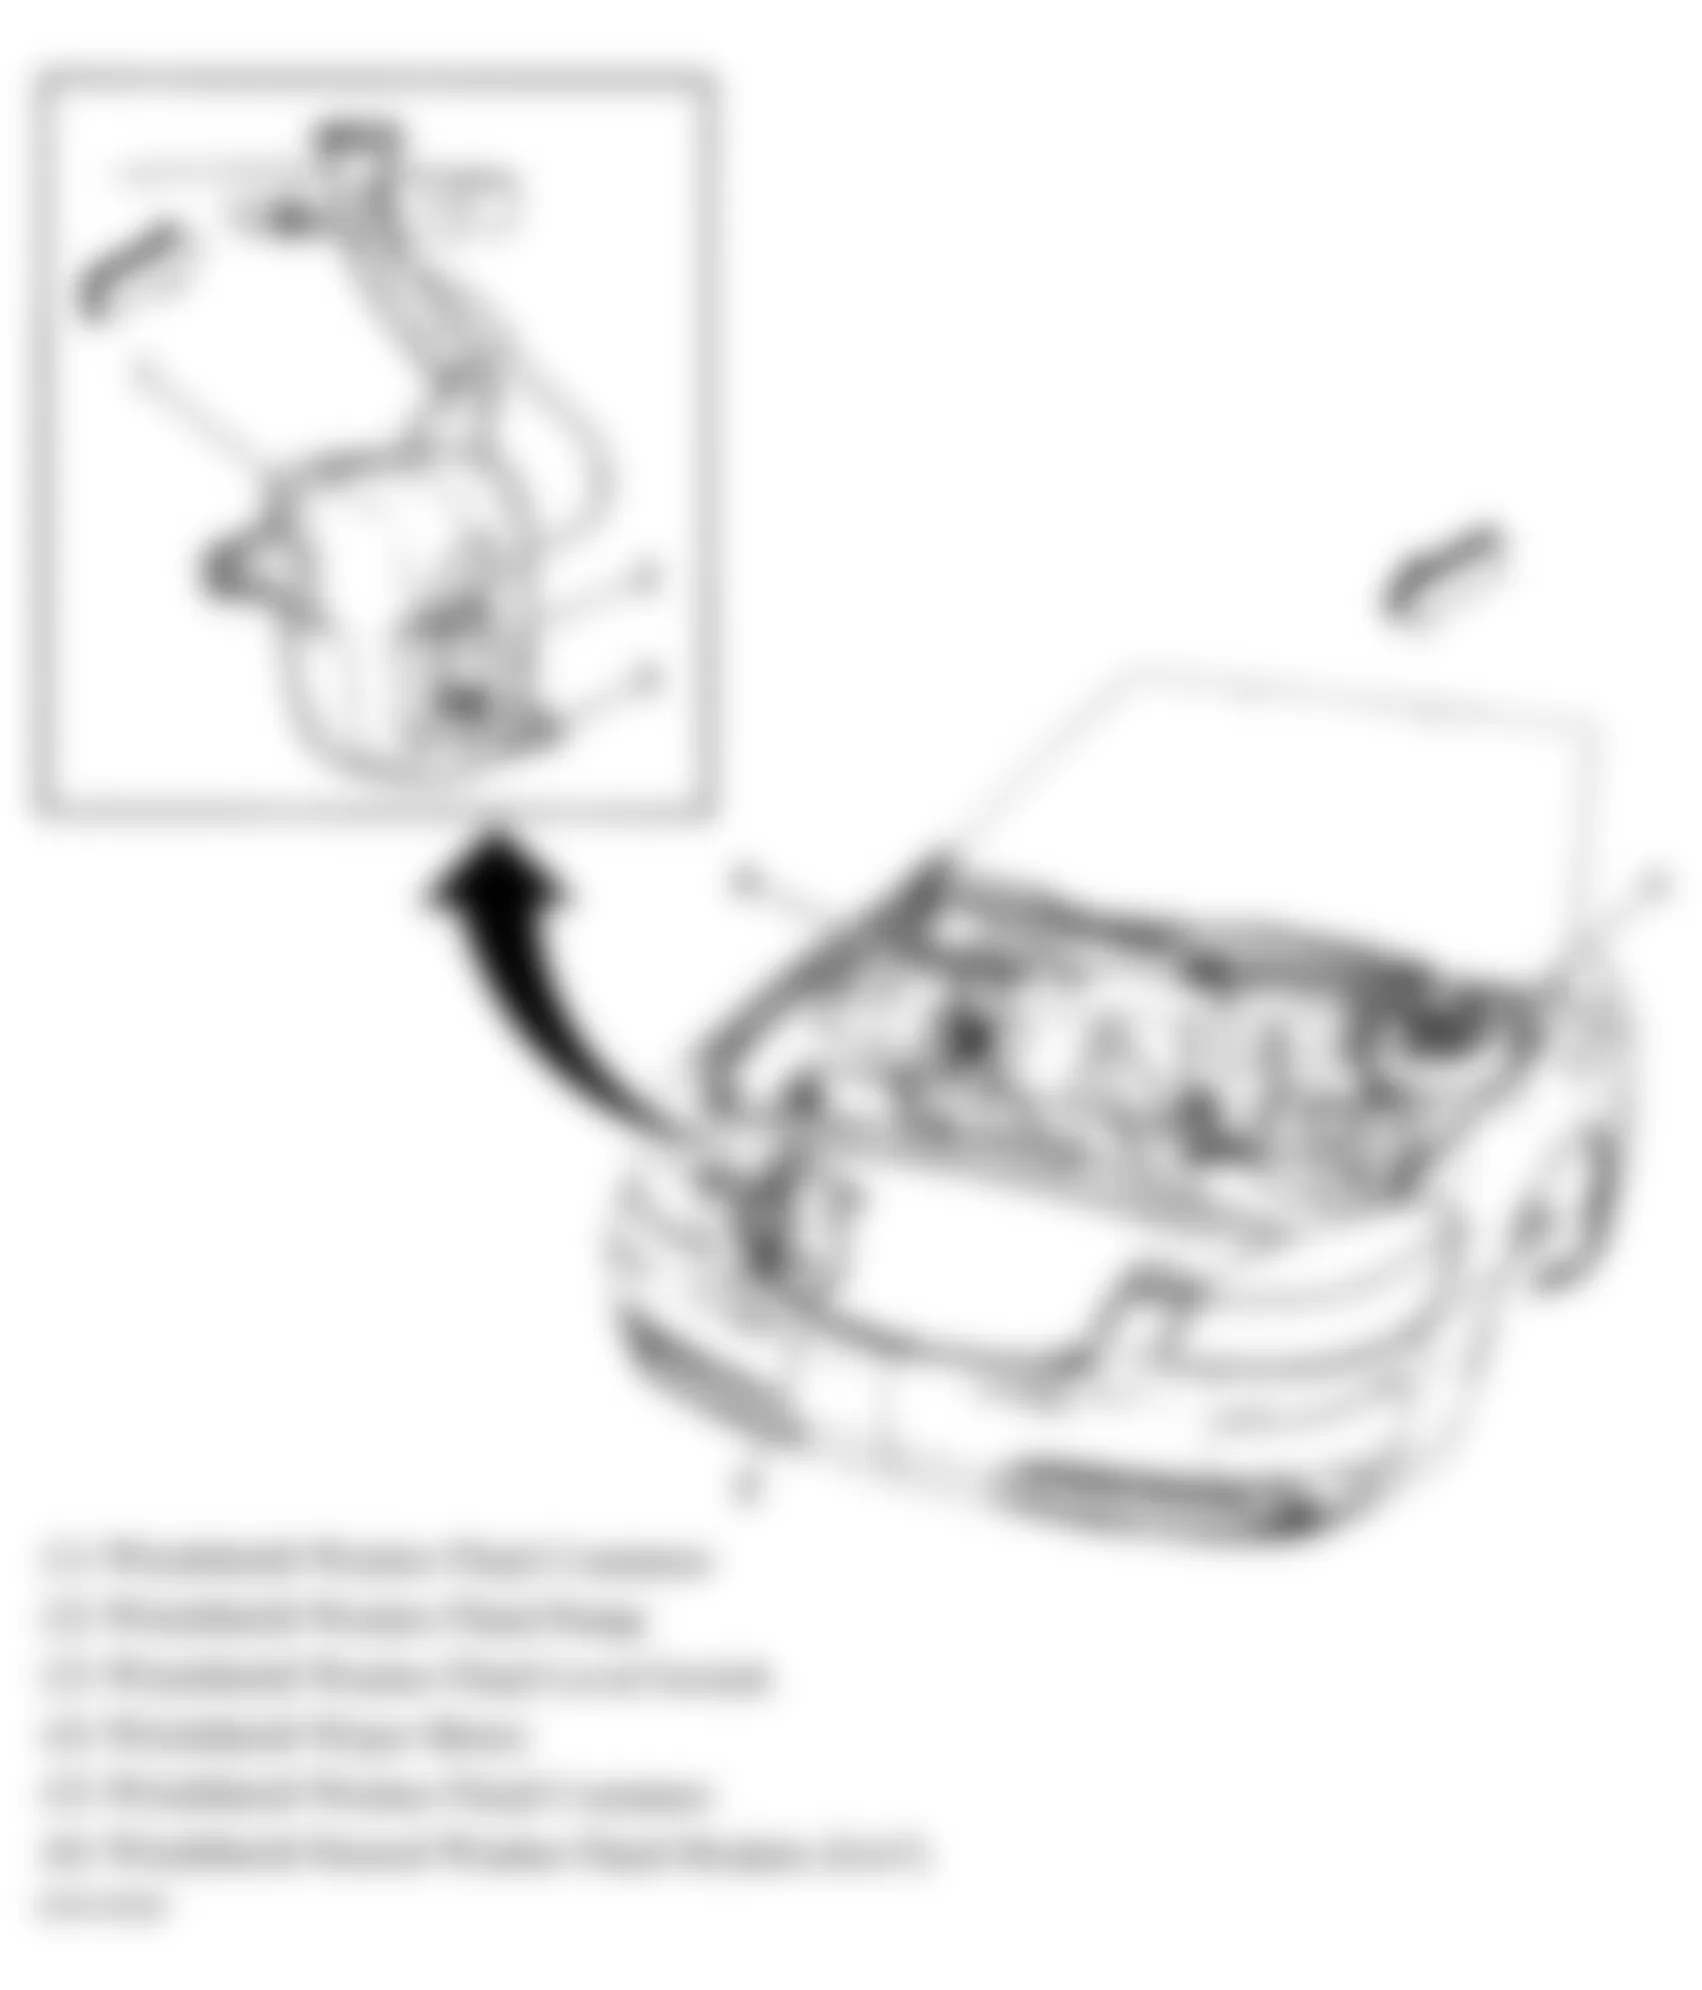 Buick Lucerne Super 2009 - Component Locations -  Engine Compartment